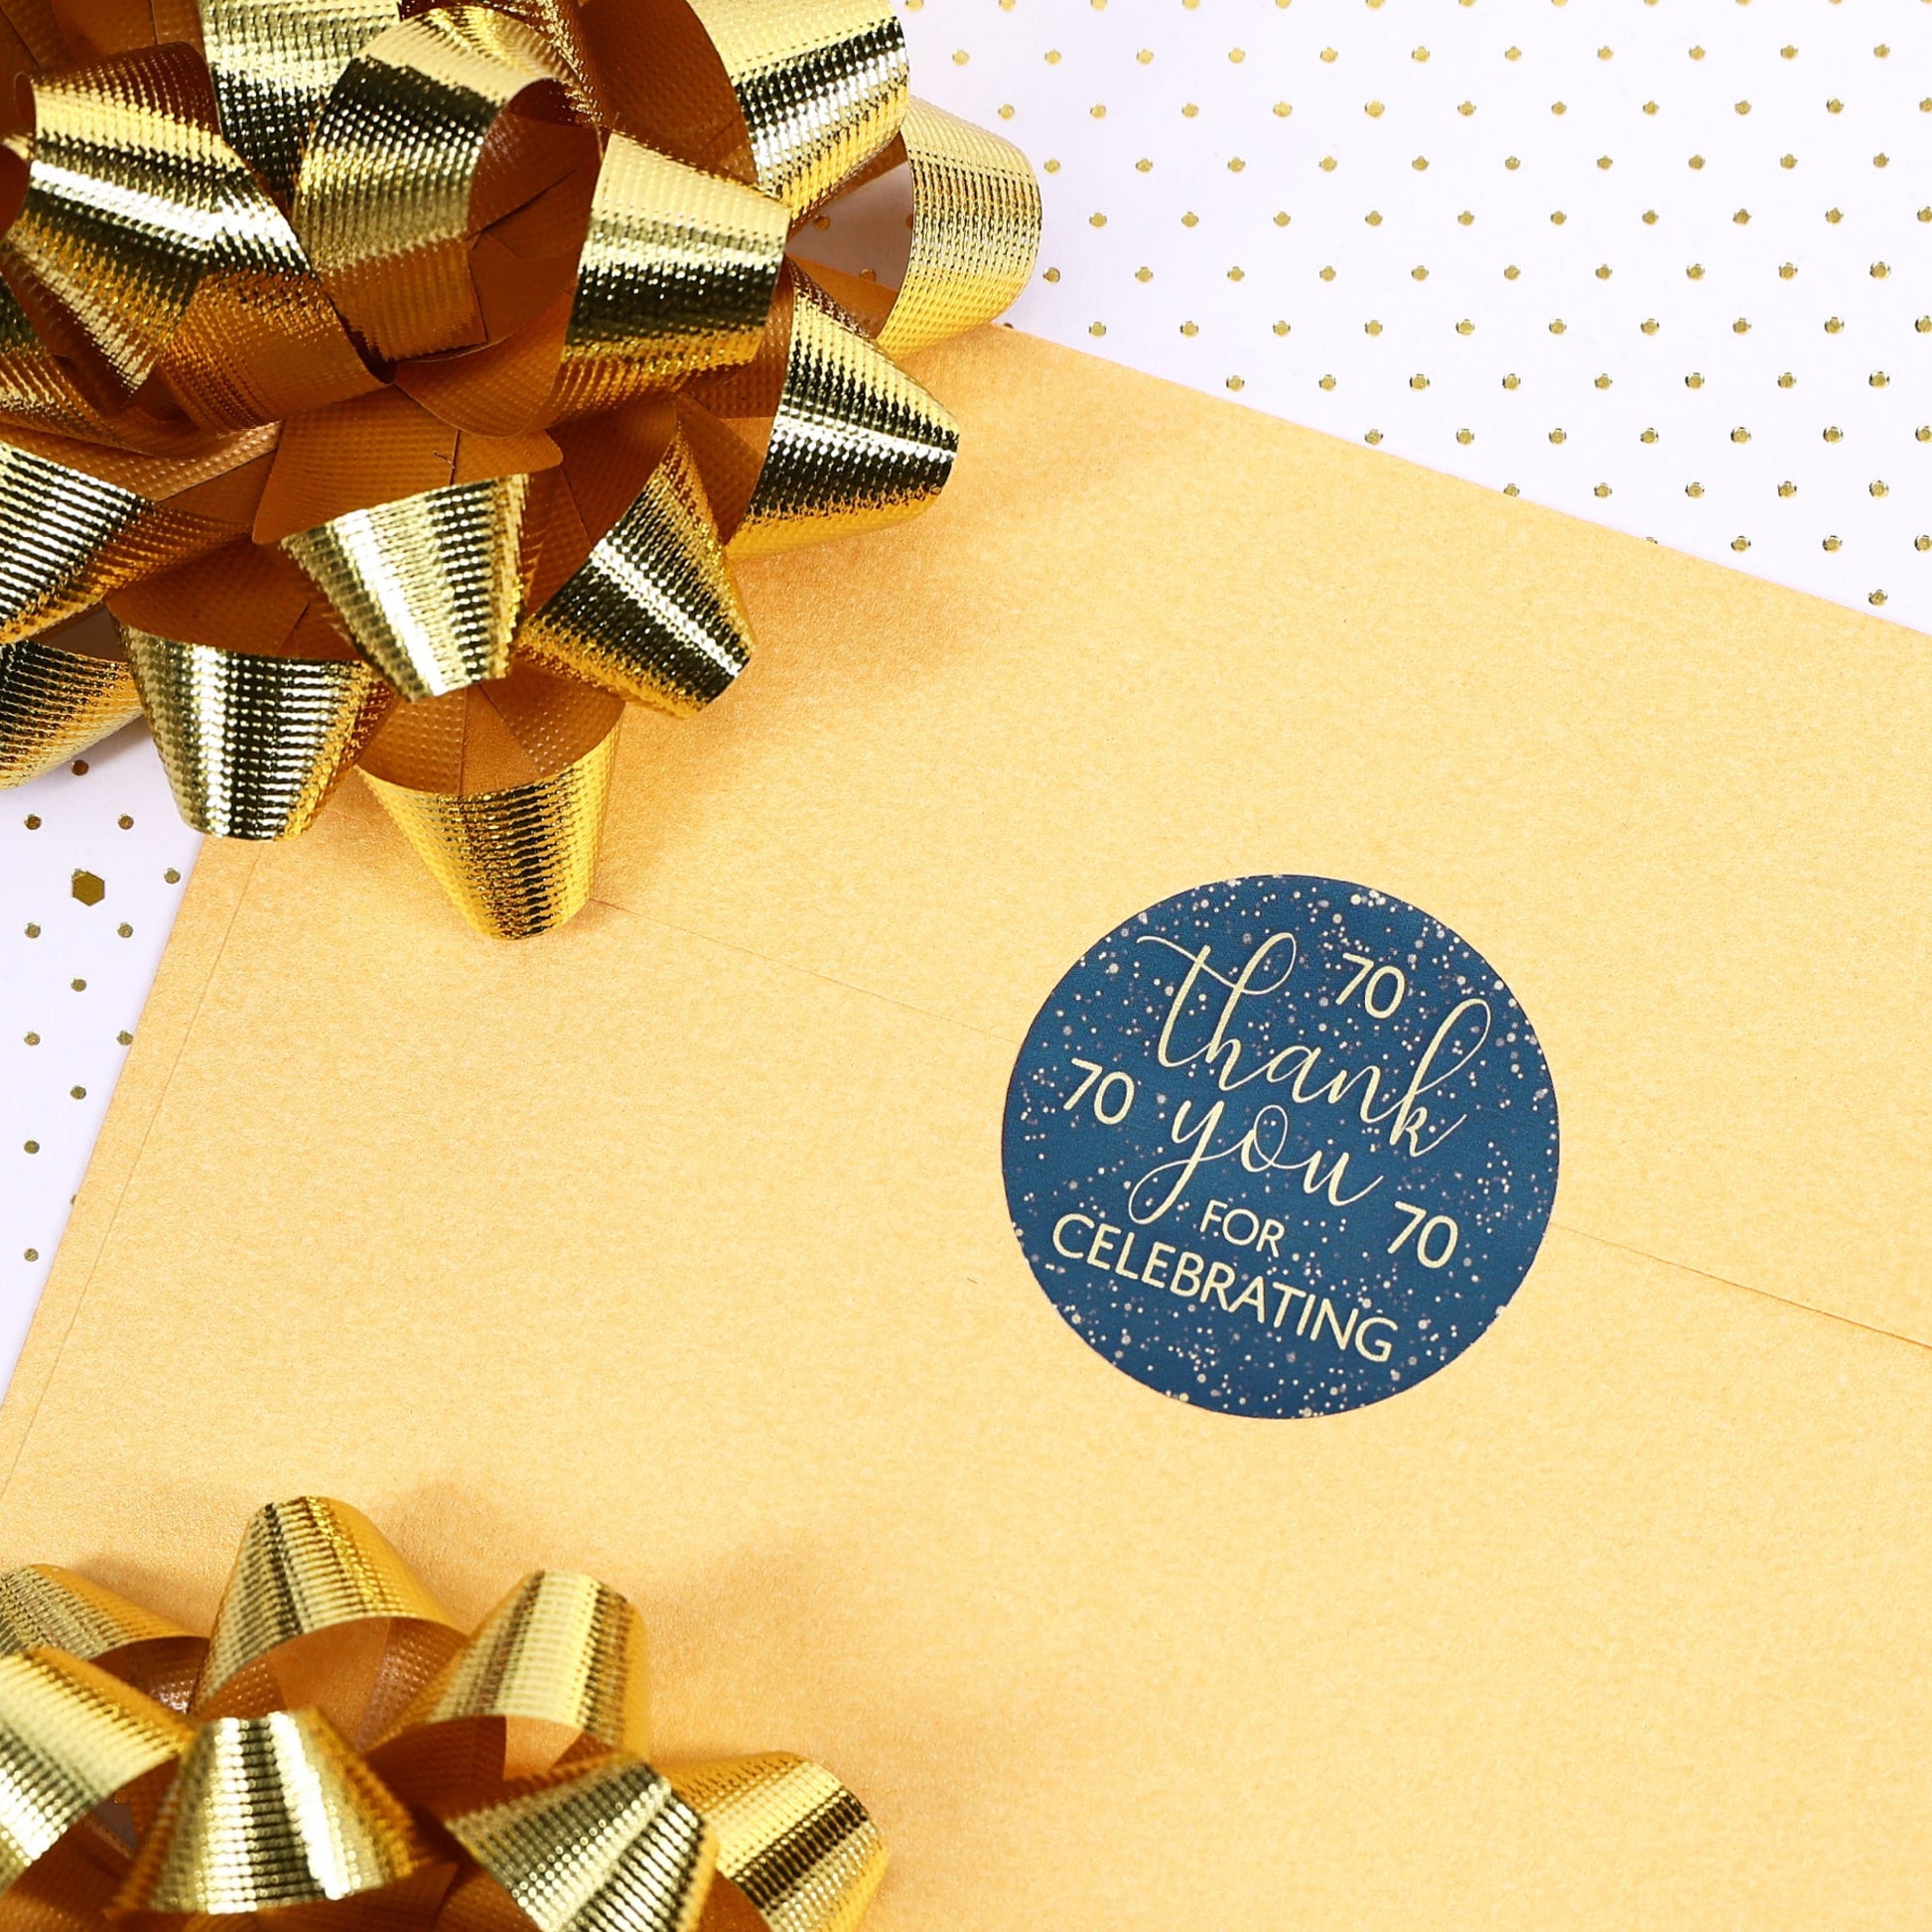 Customize your 70th birthday thank you cards with Navy Blue and Gold Stickers for a personal touch.